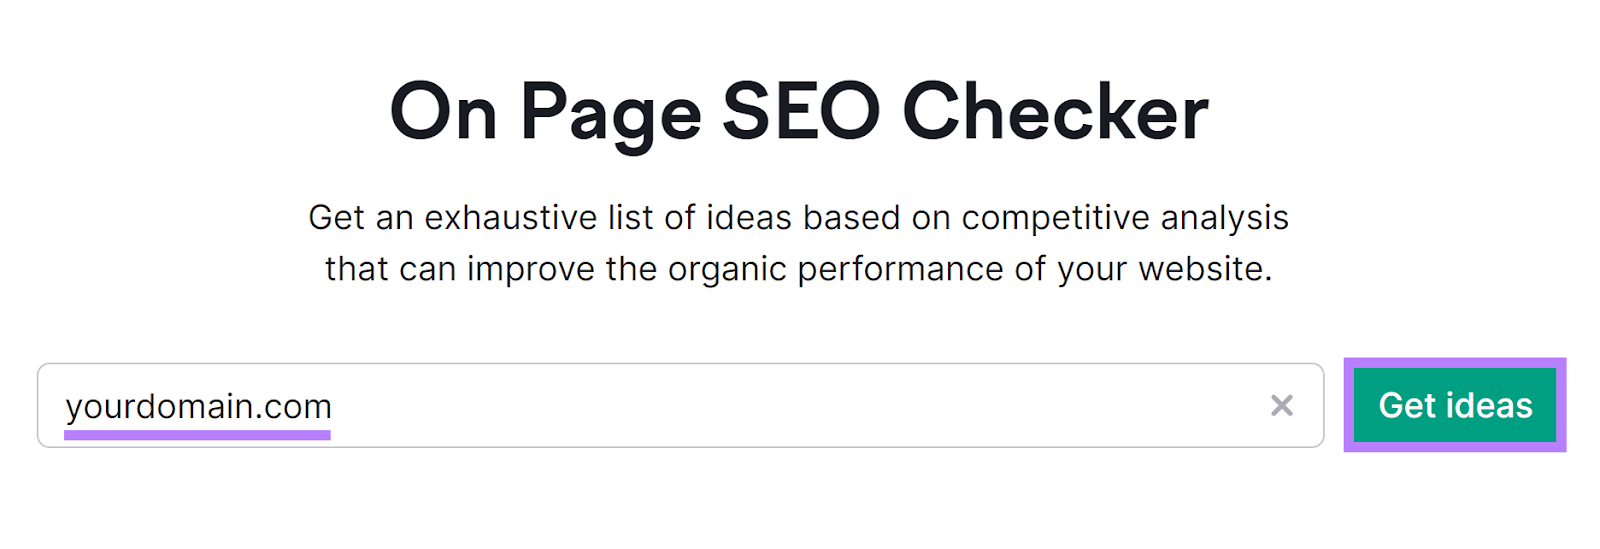 Semrush on page seo checker tool start page with 'yourdomain.com' in input field and 'Get ideas' button highlighted.